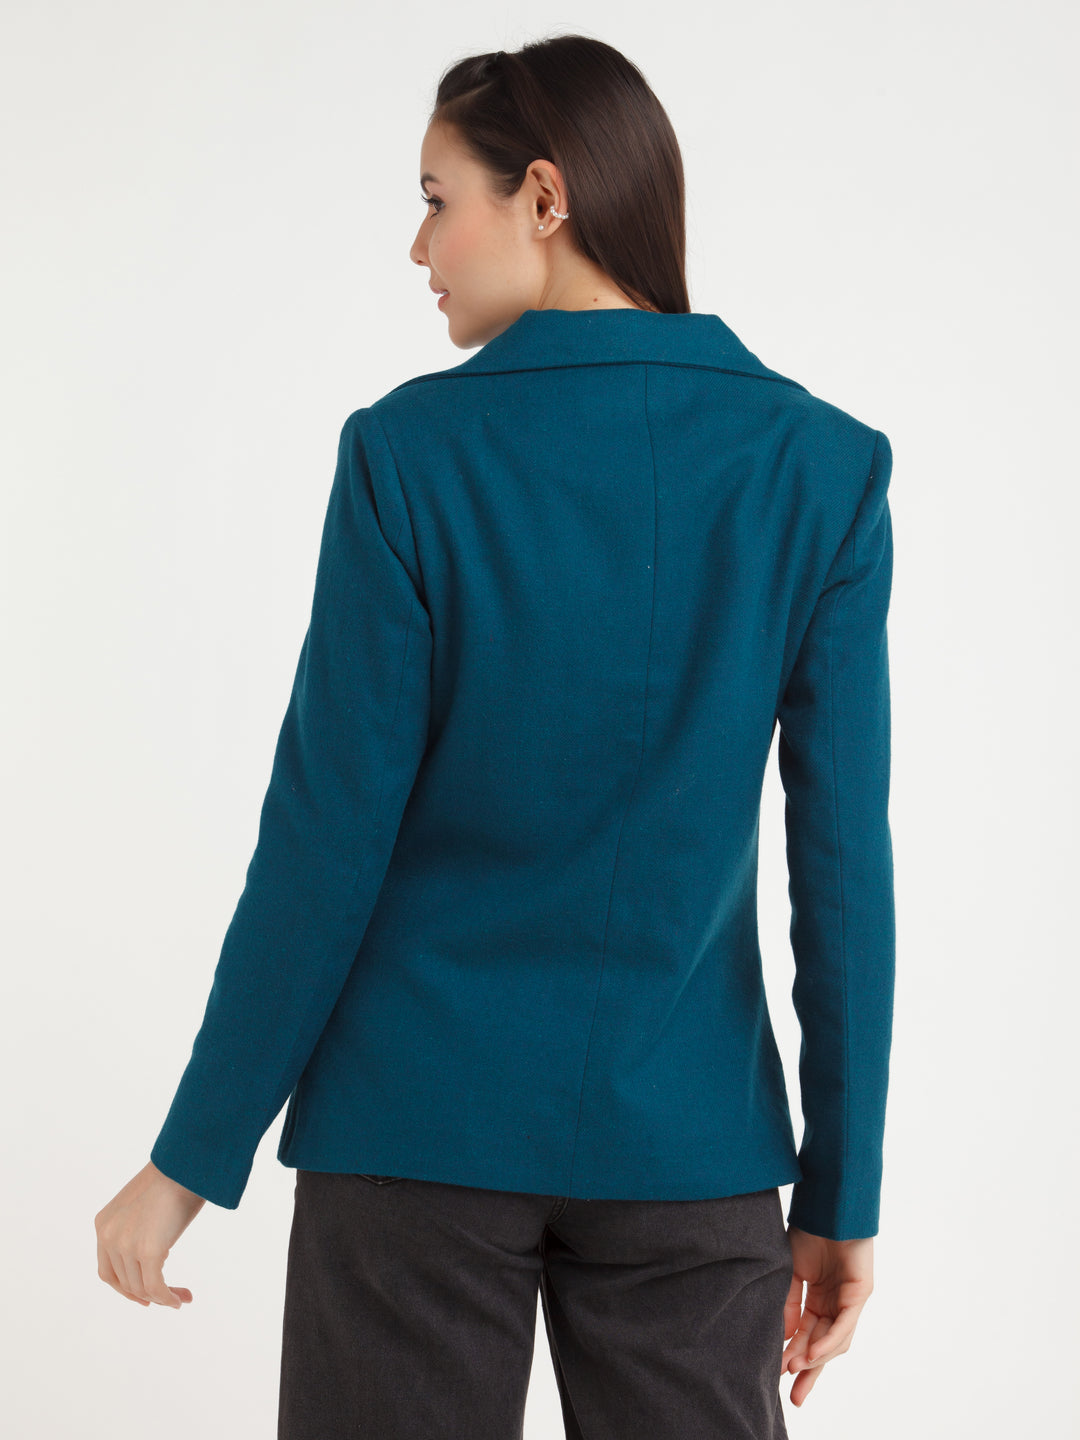 Teal Solid Coat For Women